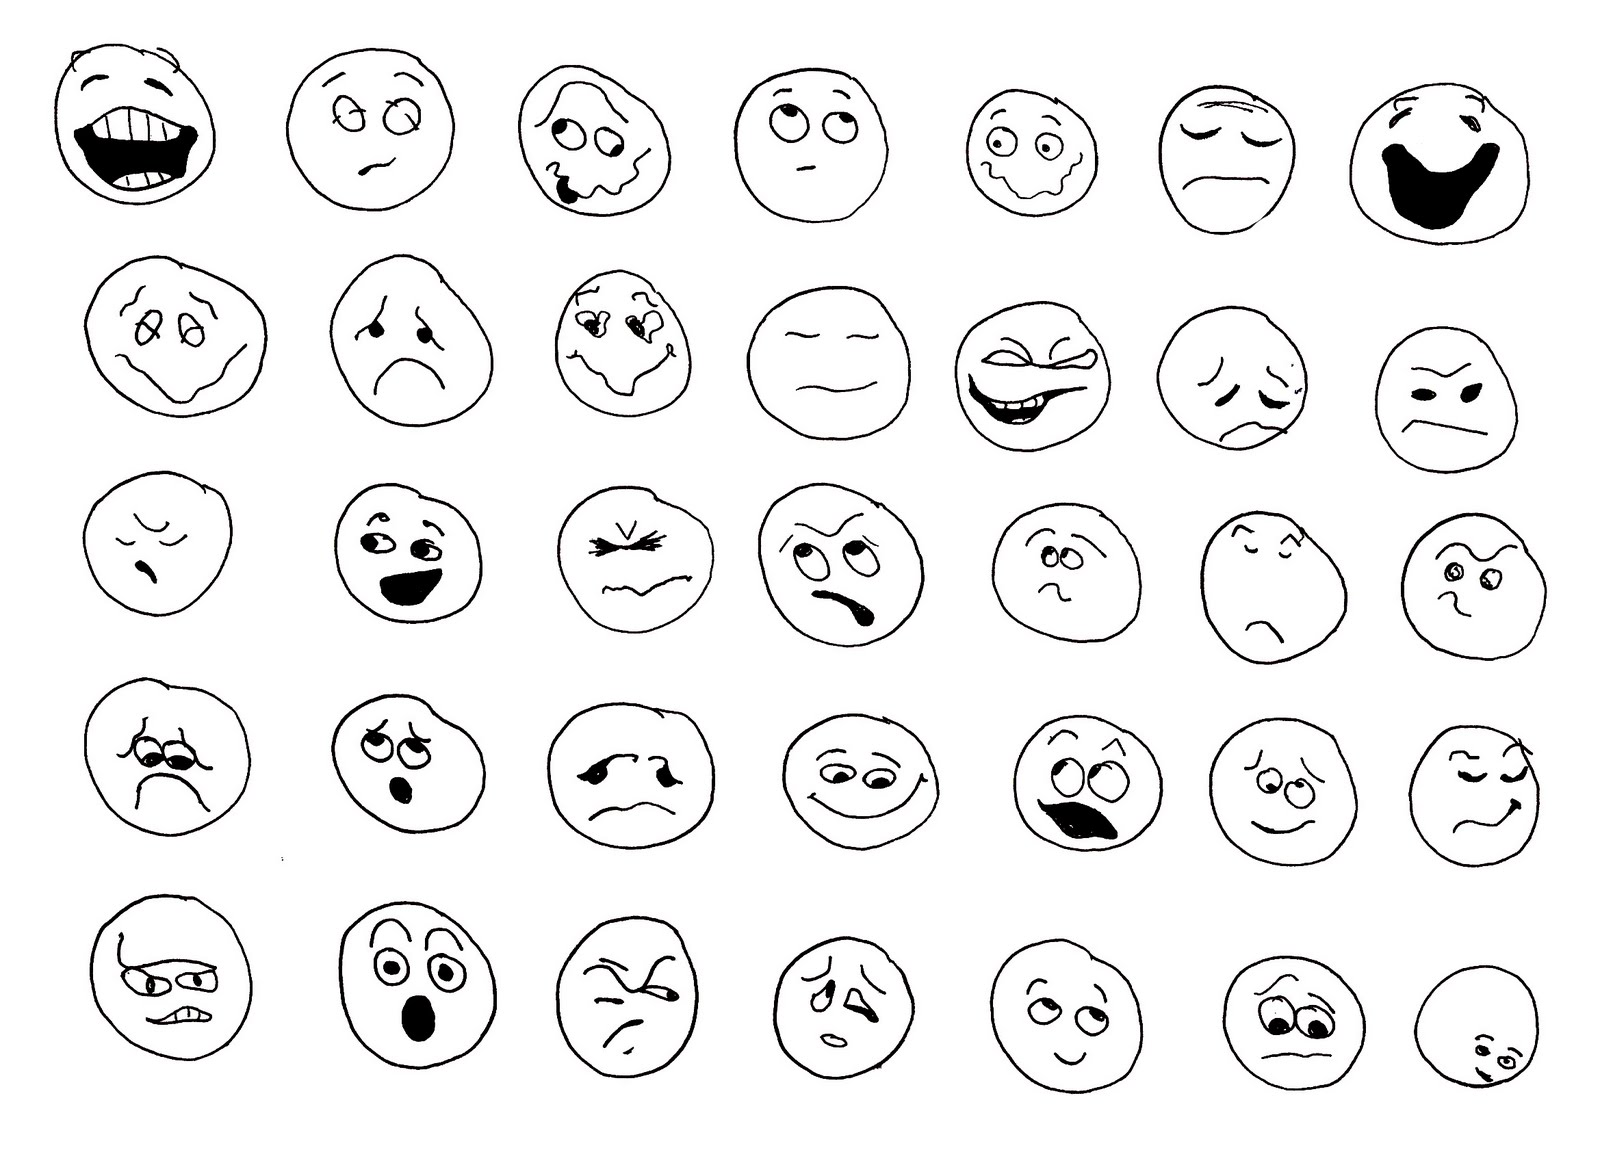 Emotions faces coloring pages